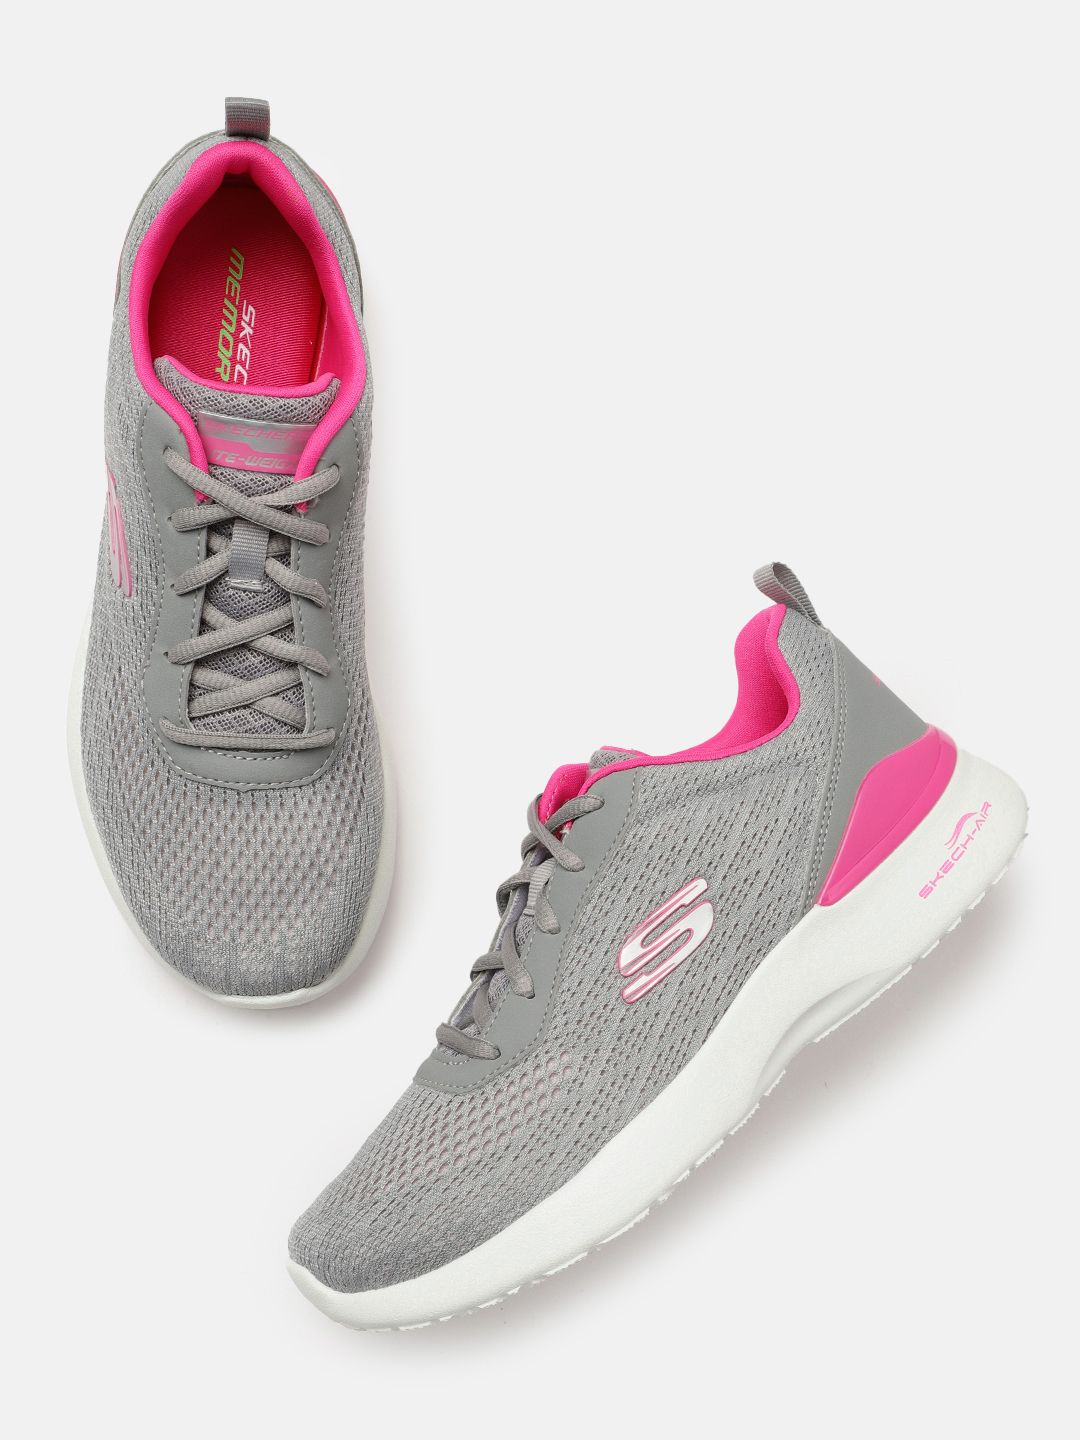 Skechers Women Grey Woven Design Skech-Air Dynamight - Top Prize Sneakers Price in India